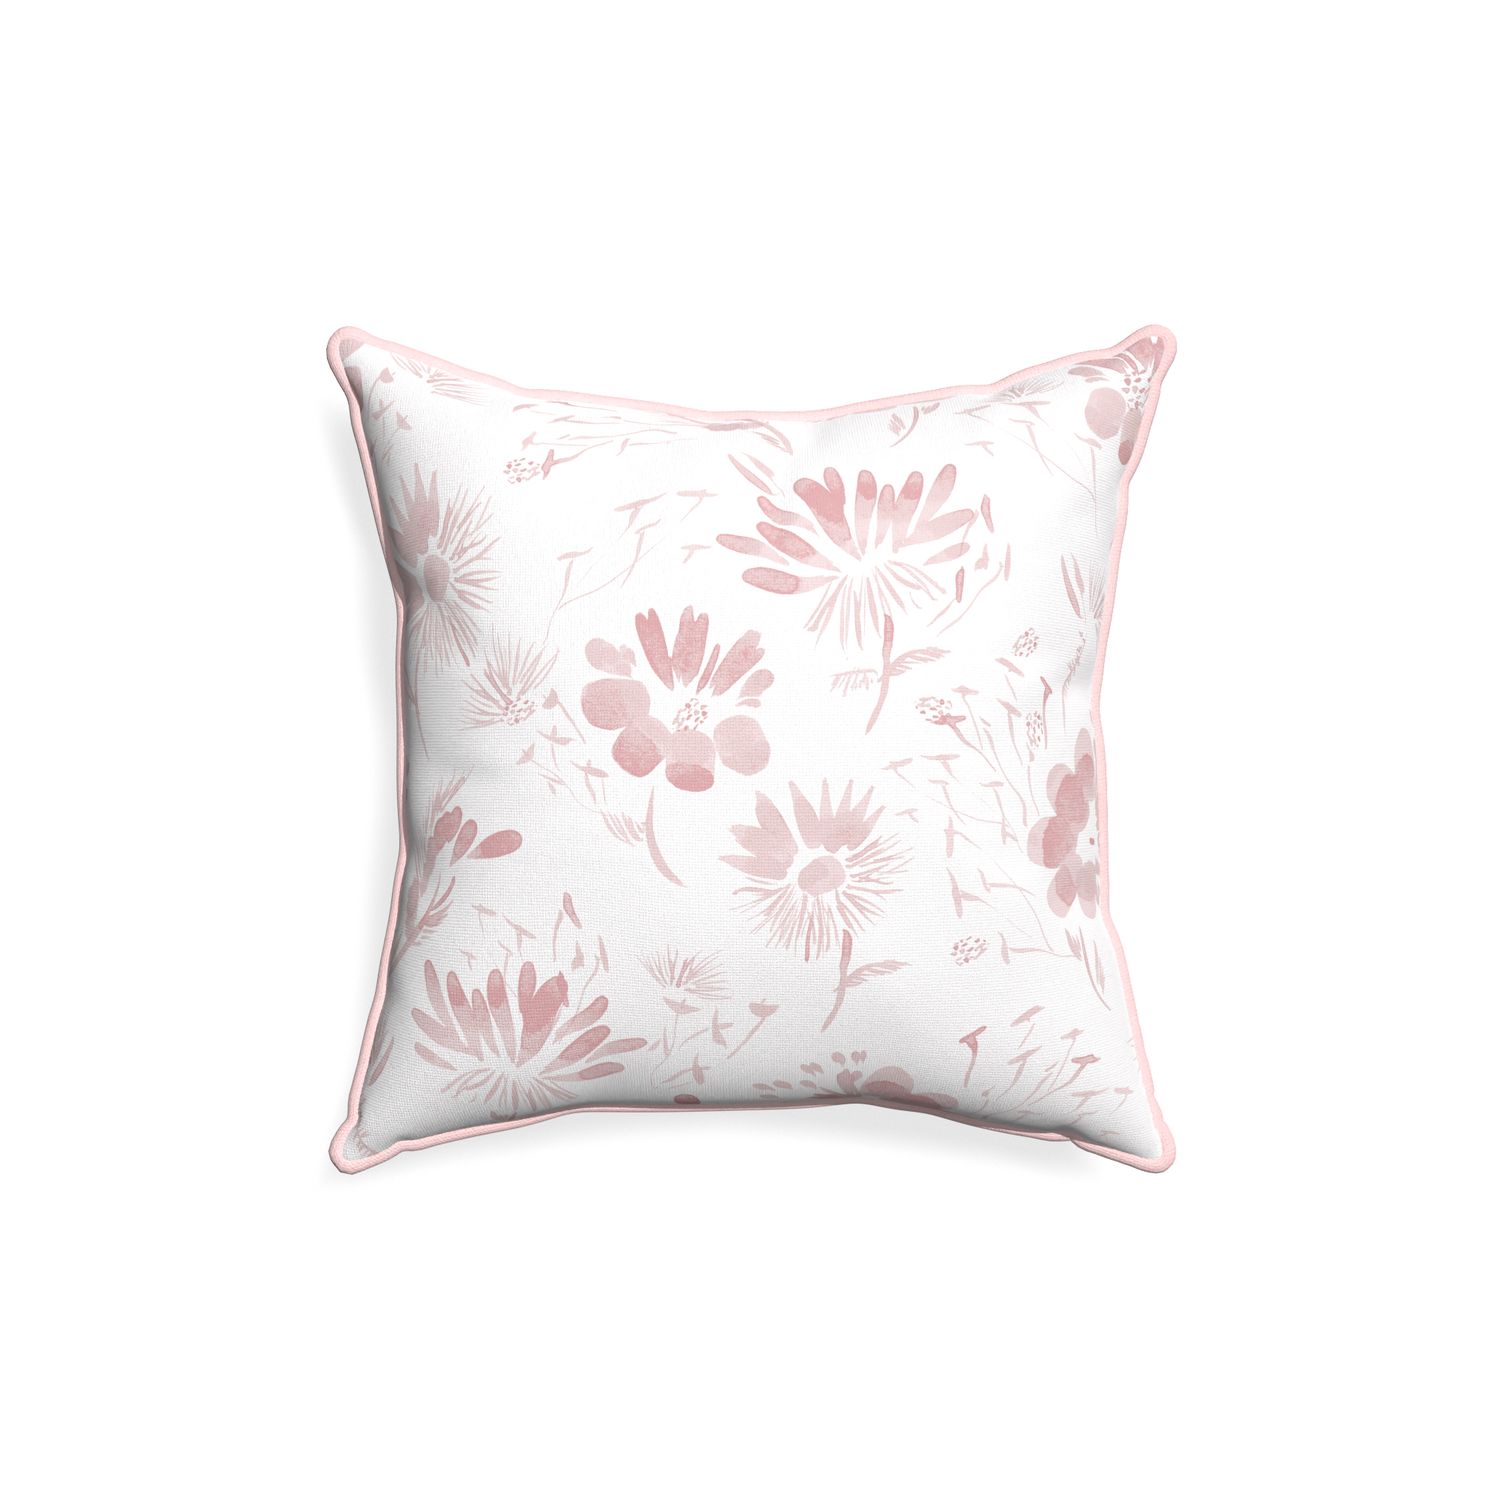 18-square blake custom pillow with petal piping on white background